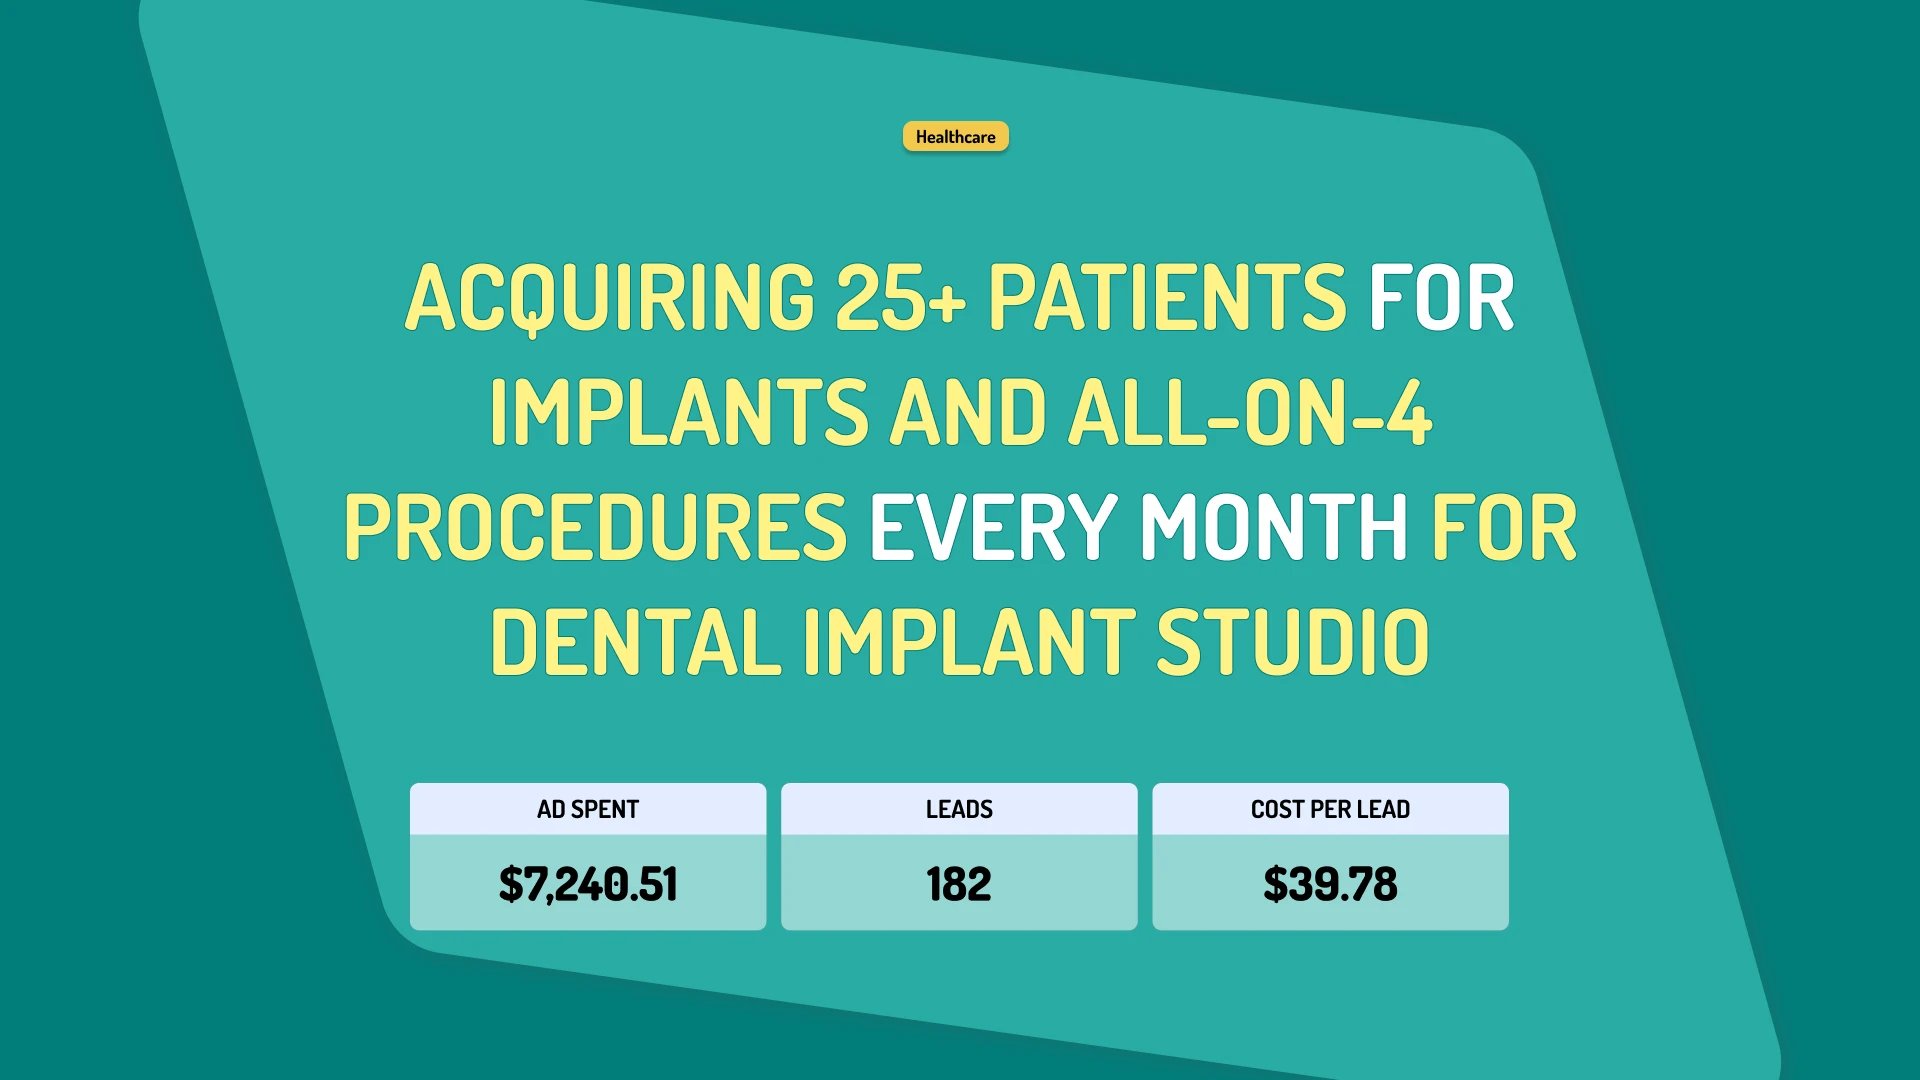 Dental Implant Studio: acquiring 25+ patient for implants and ALL-ON-4